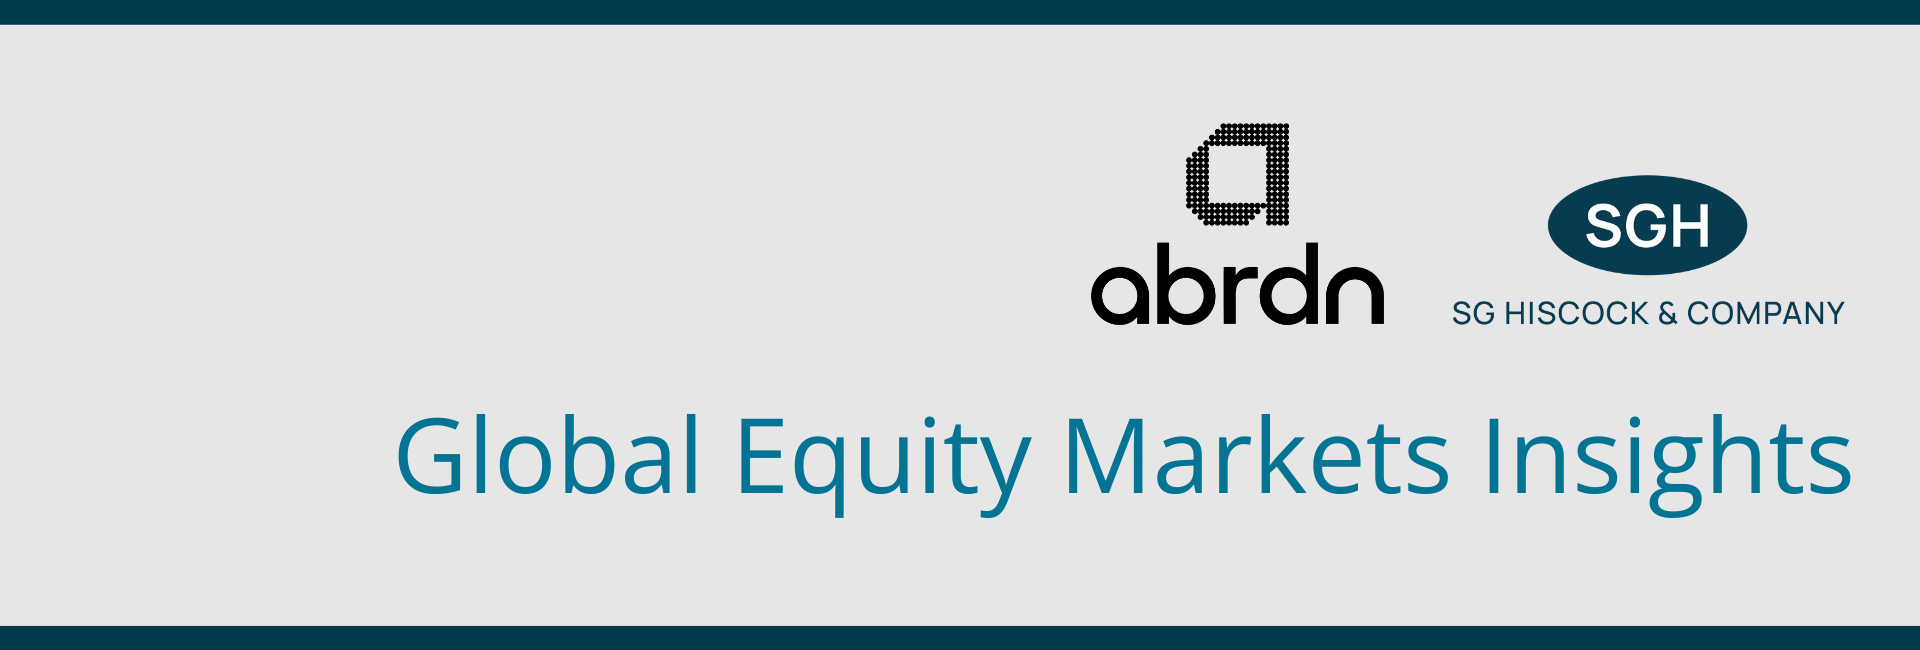 Global Equities Outlook, abrdn and SGH